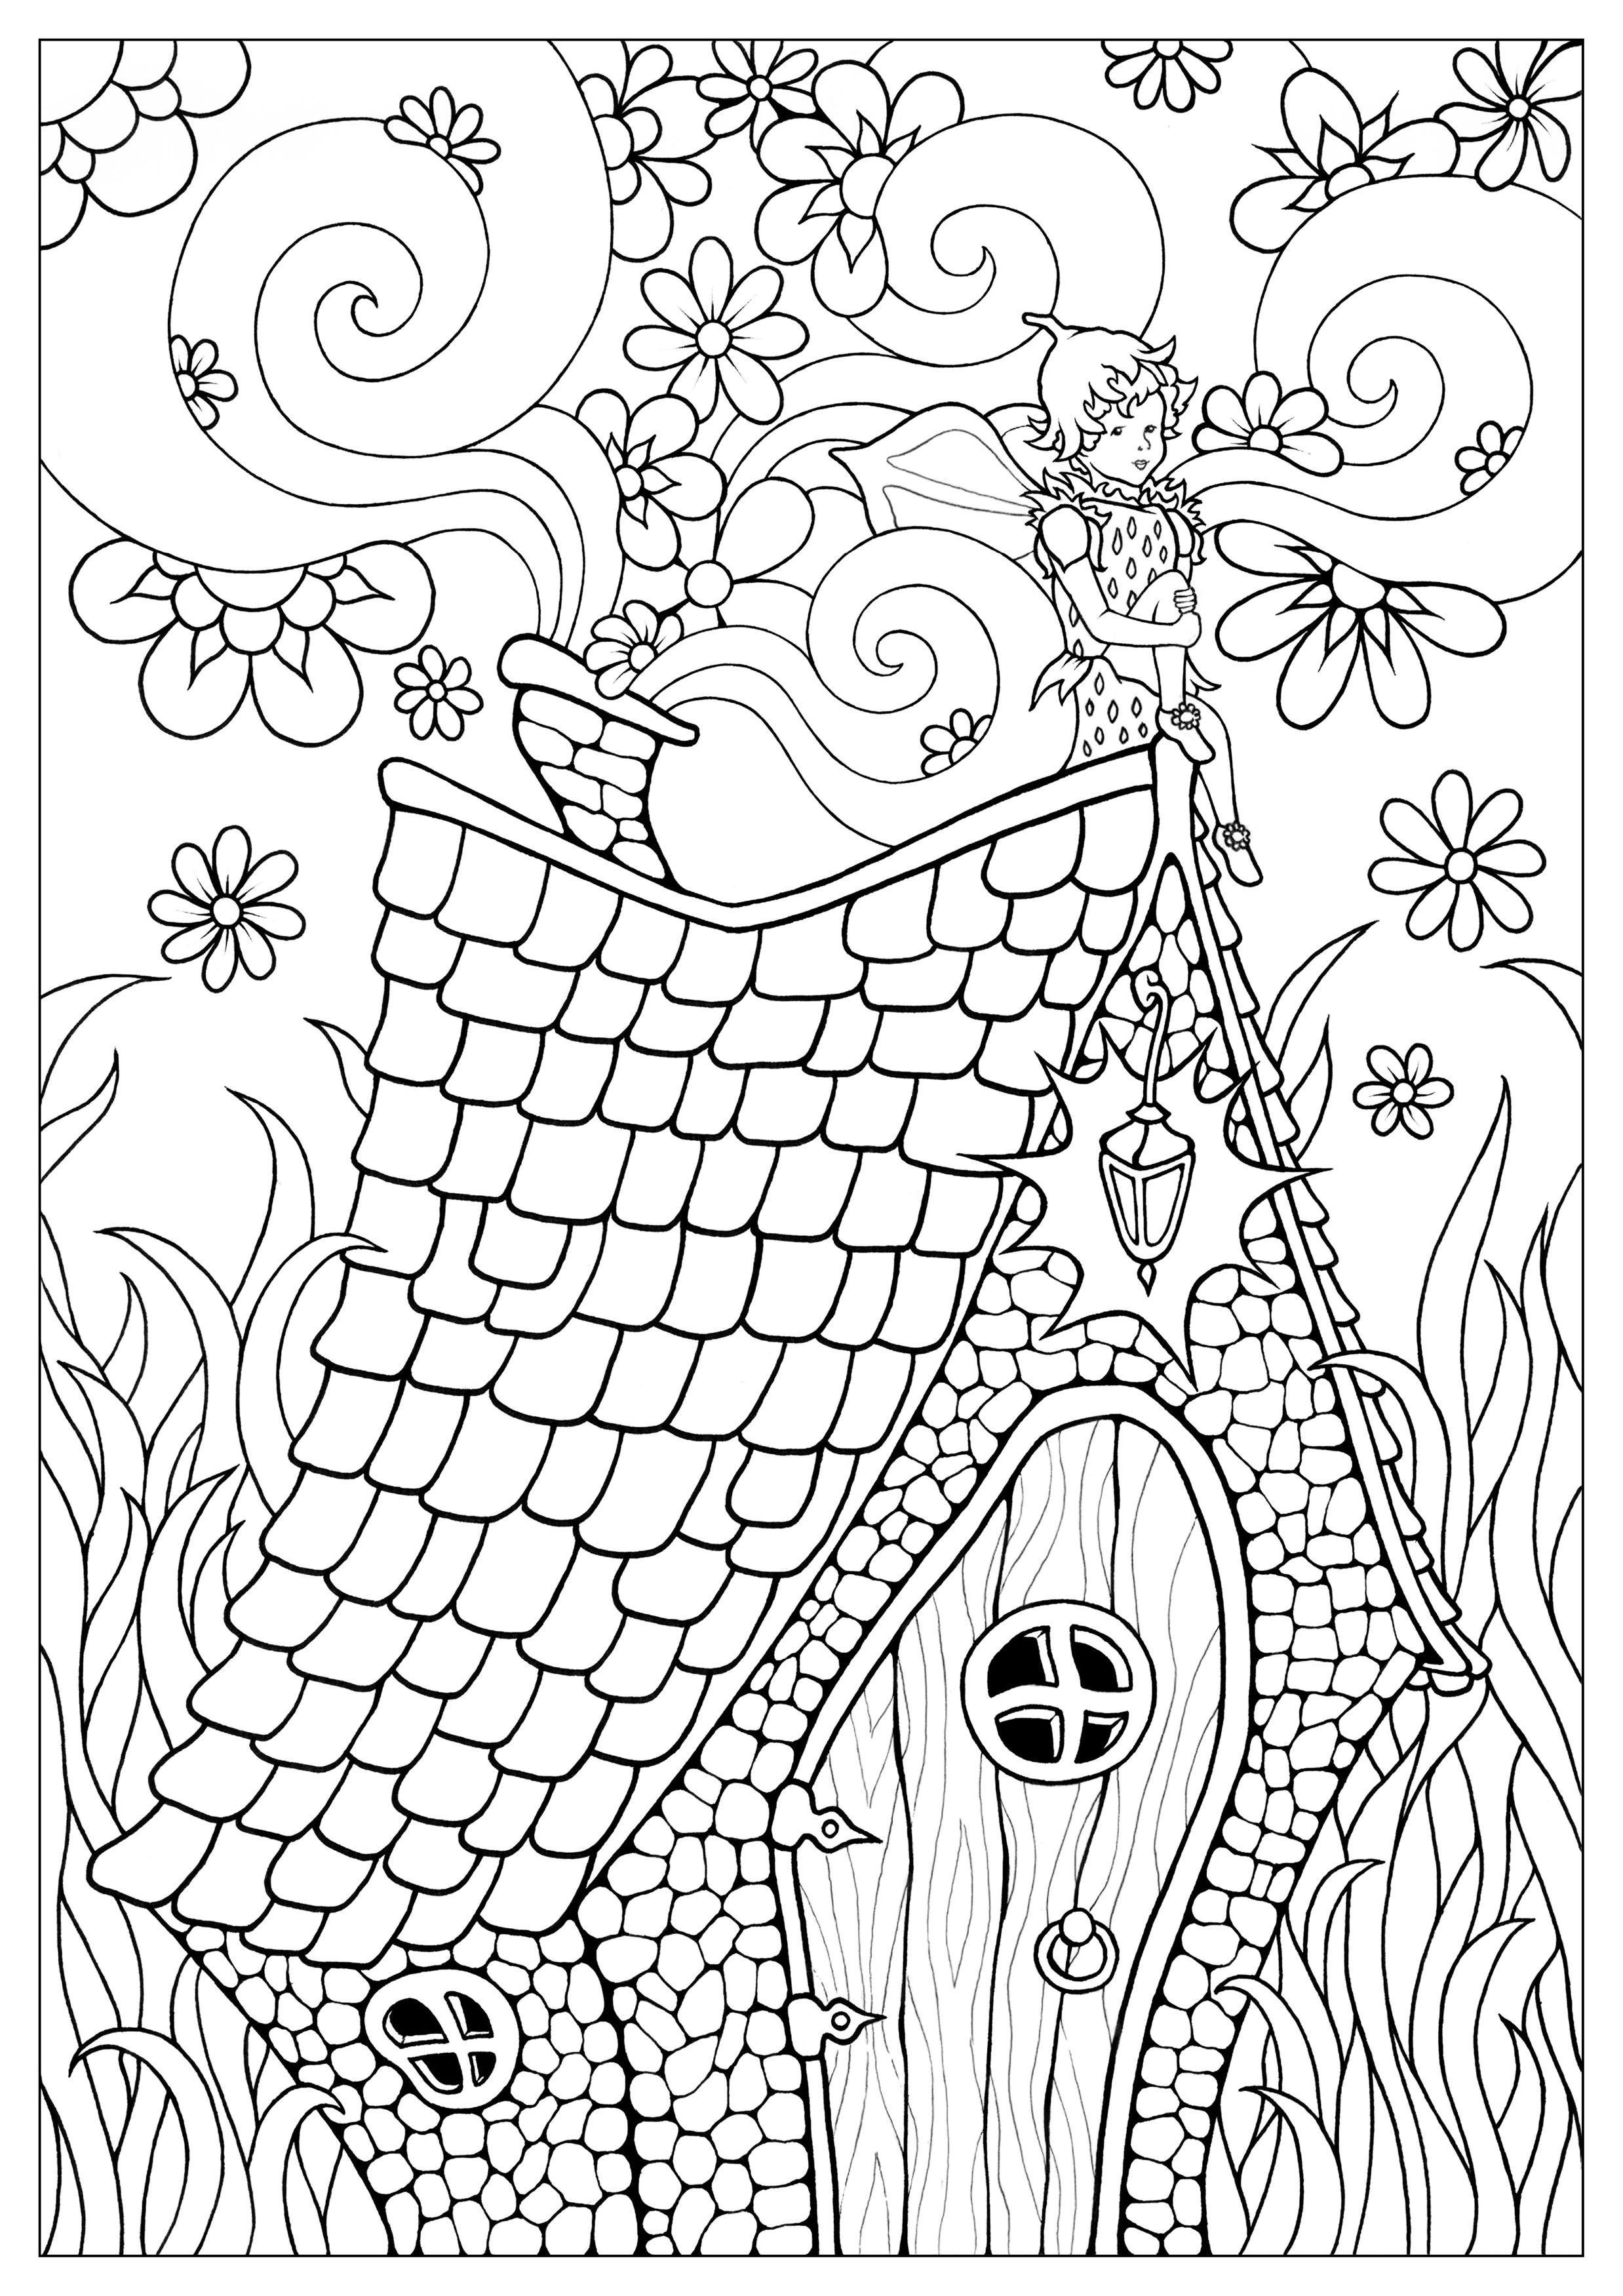 Fairy Coloring Pages: 190+ Fantasy Enchanting Pages to Spark Your Imagination 2